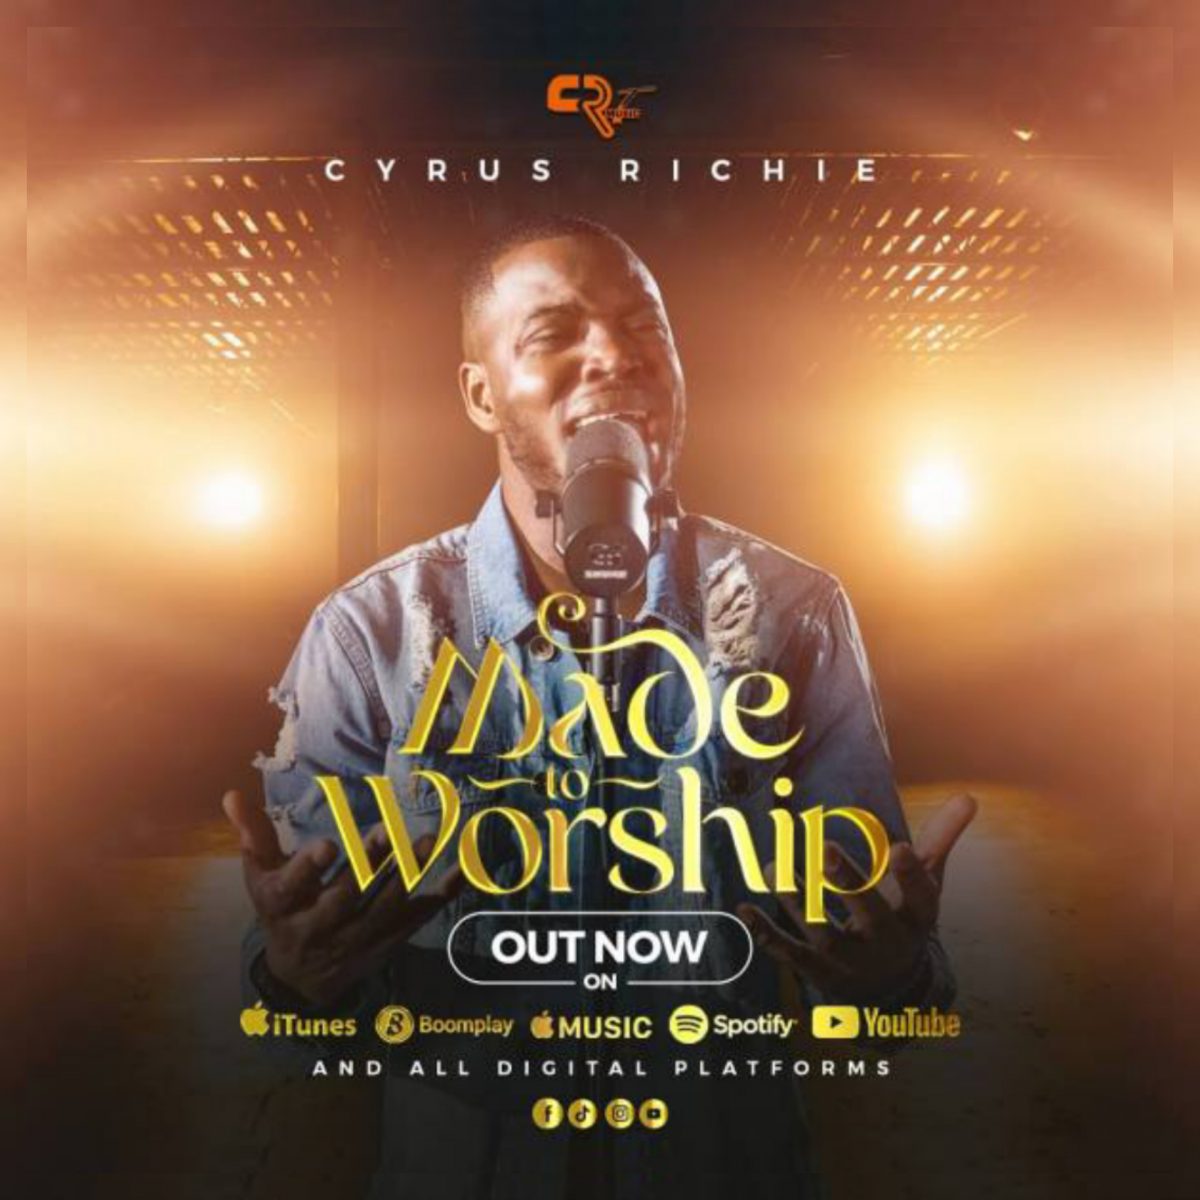 Made to Worship By Cyrus Richie